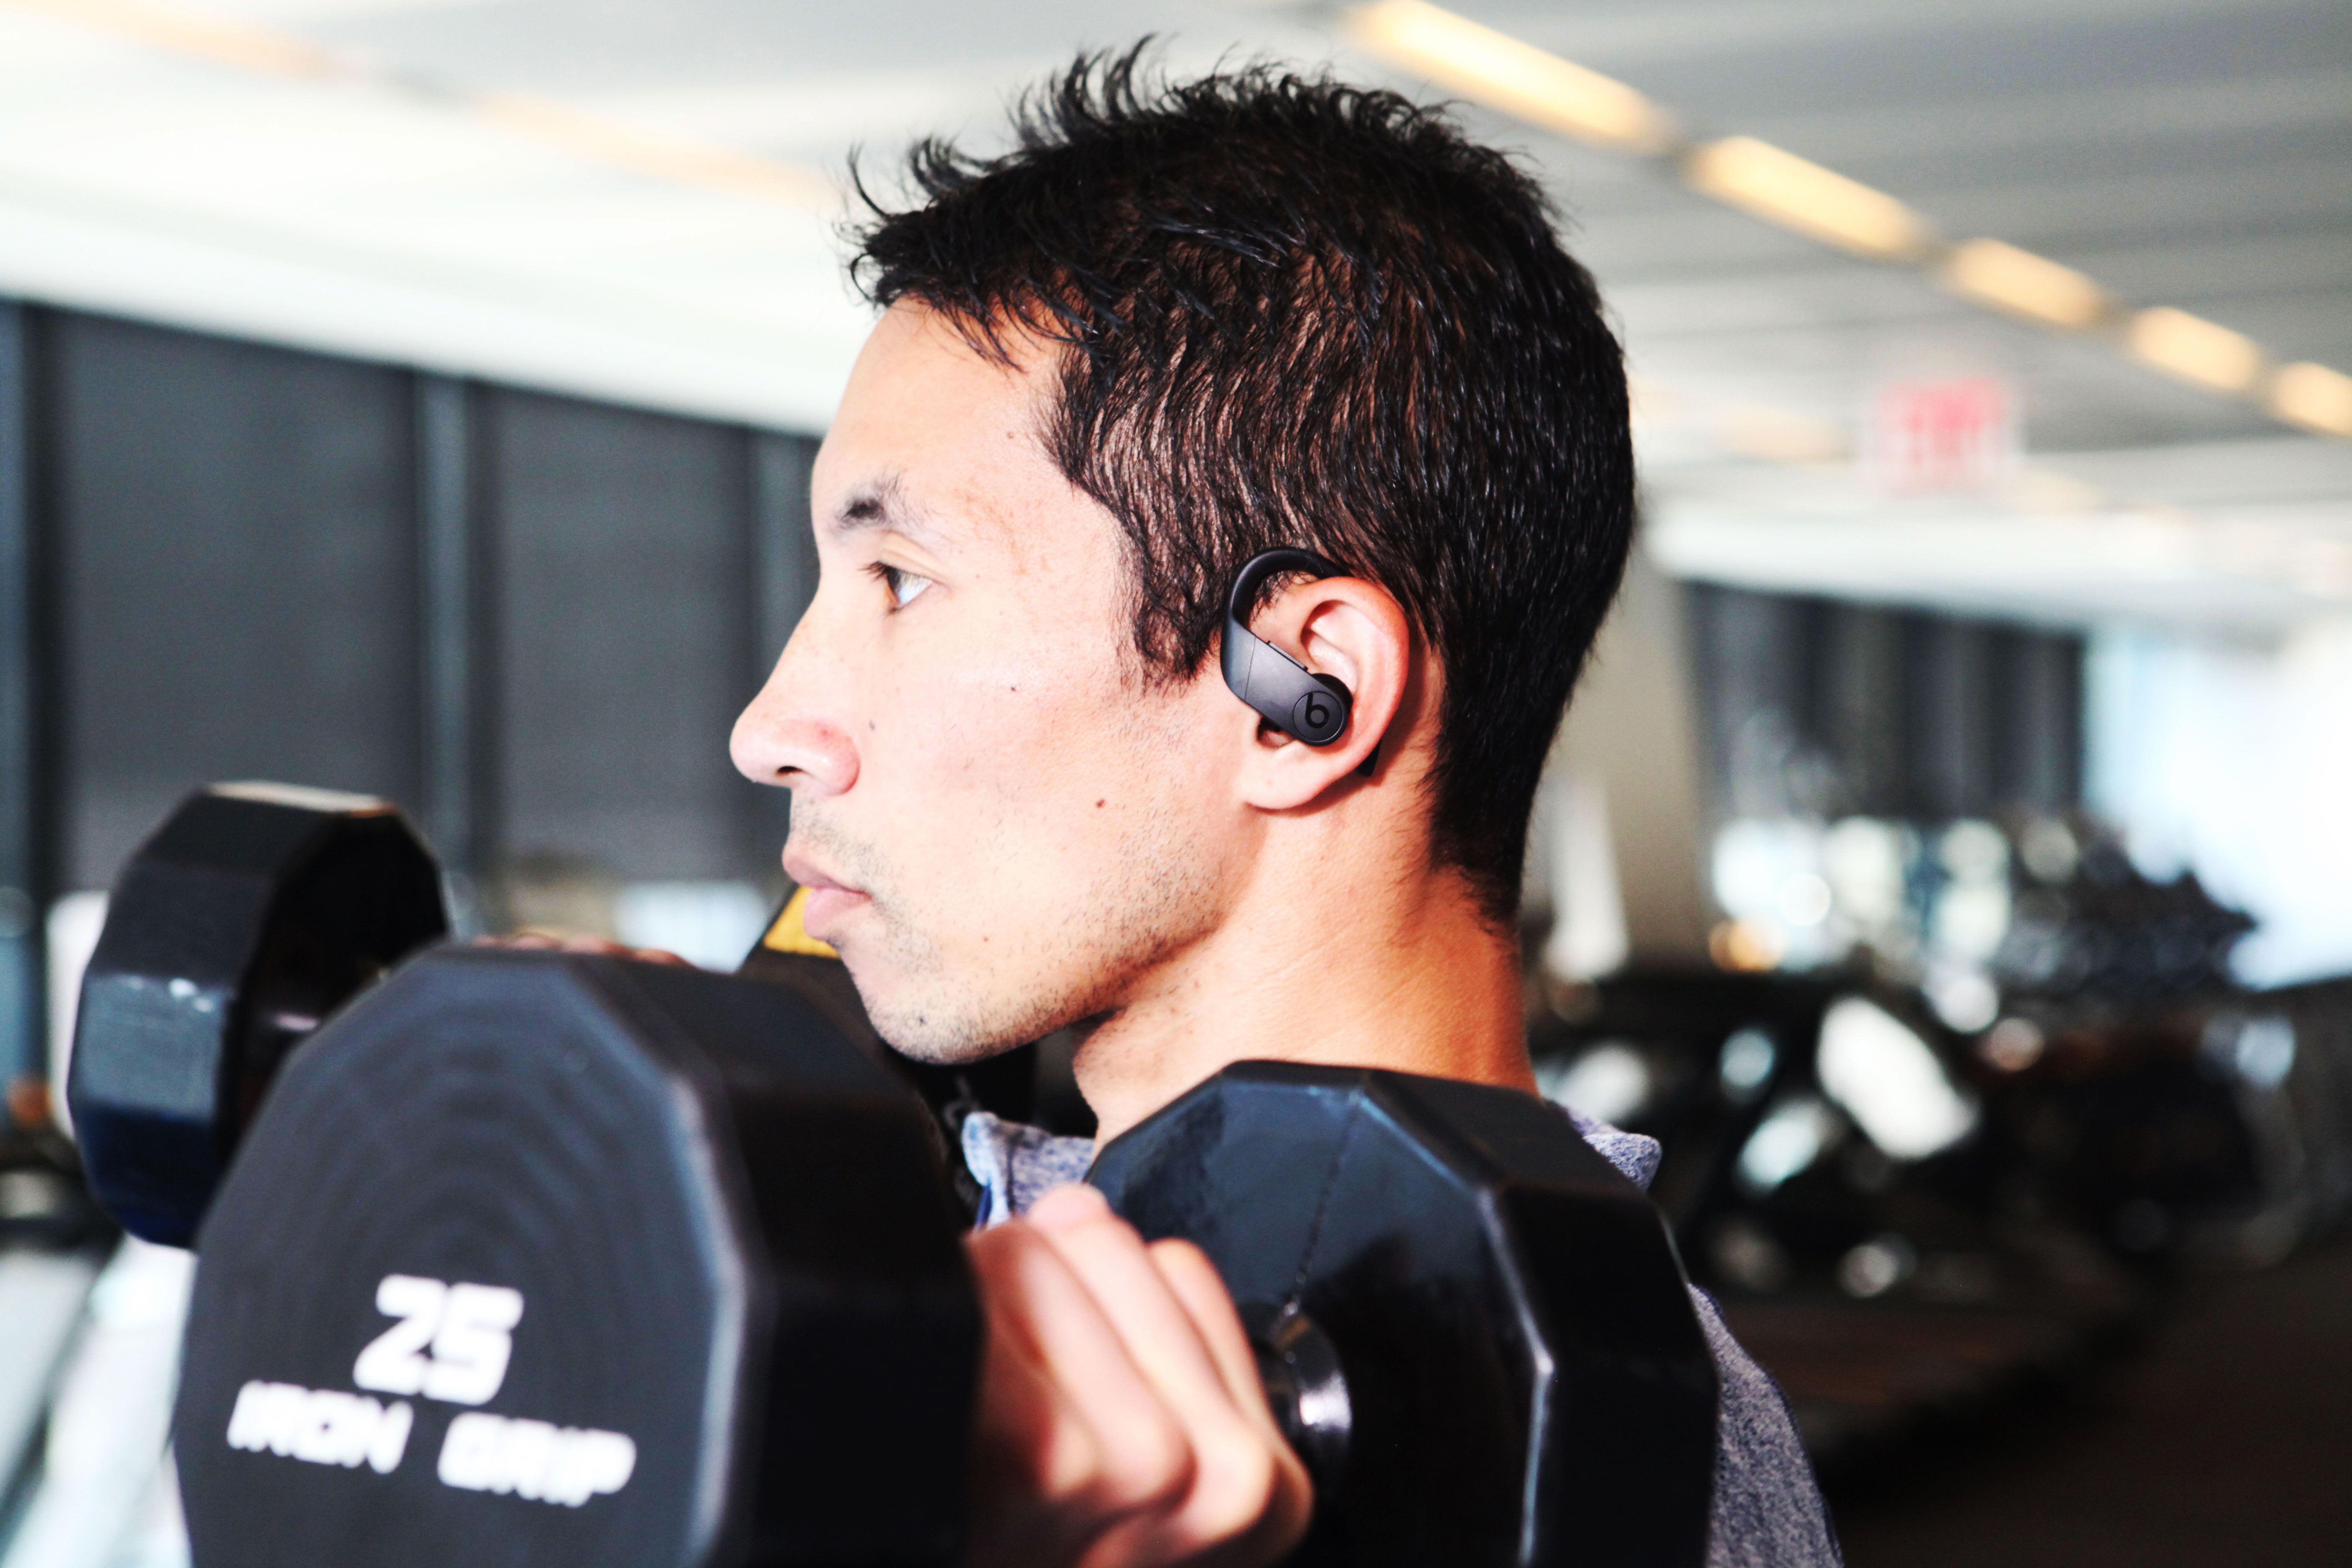 PowerBeats Pro Earbuds Will Stay On During Any Fitness Challenge